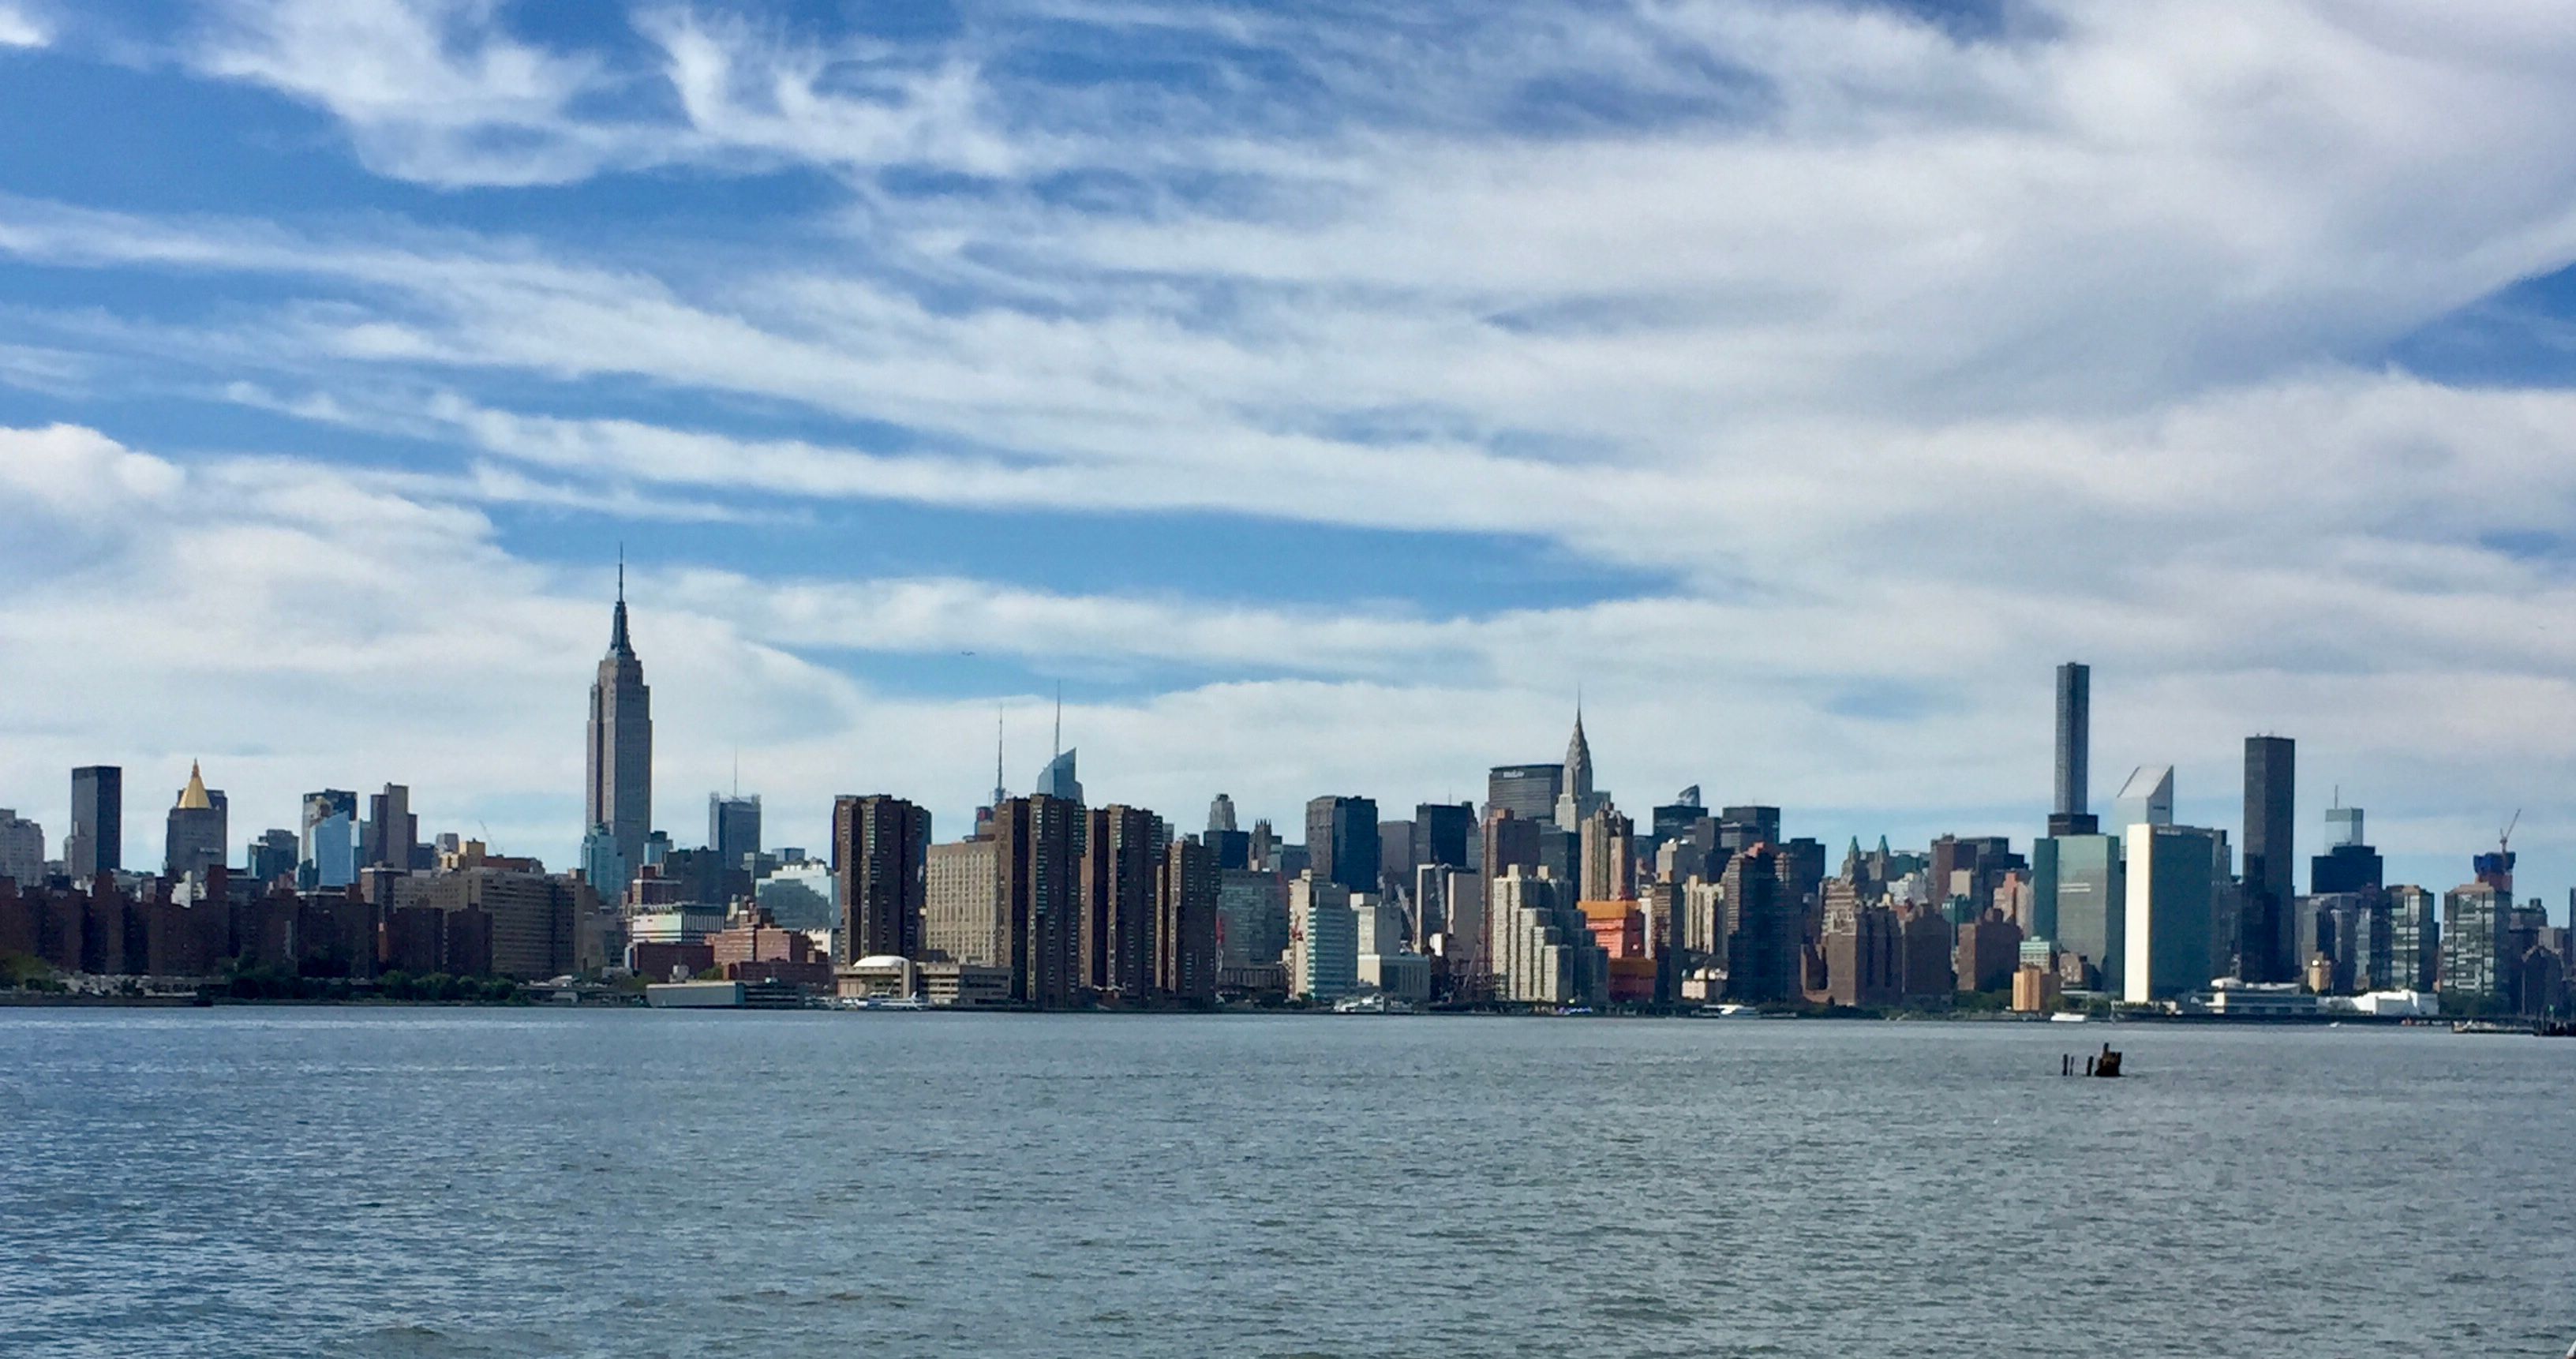 Caption: A photo of the Manhattan skyline taken across the water on a partly cloudy day.